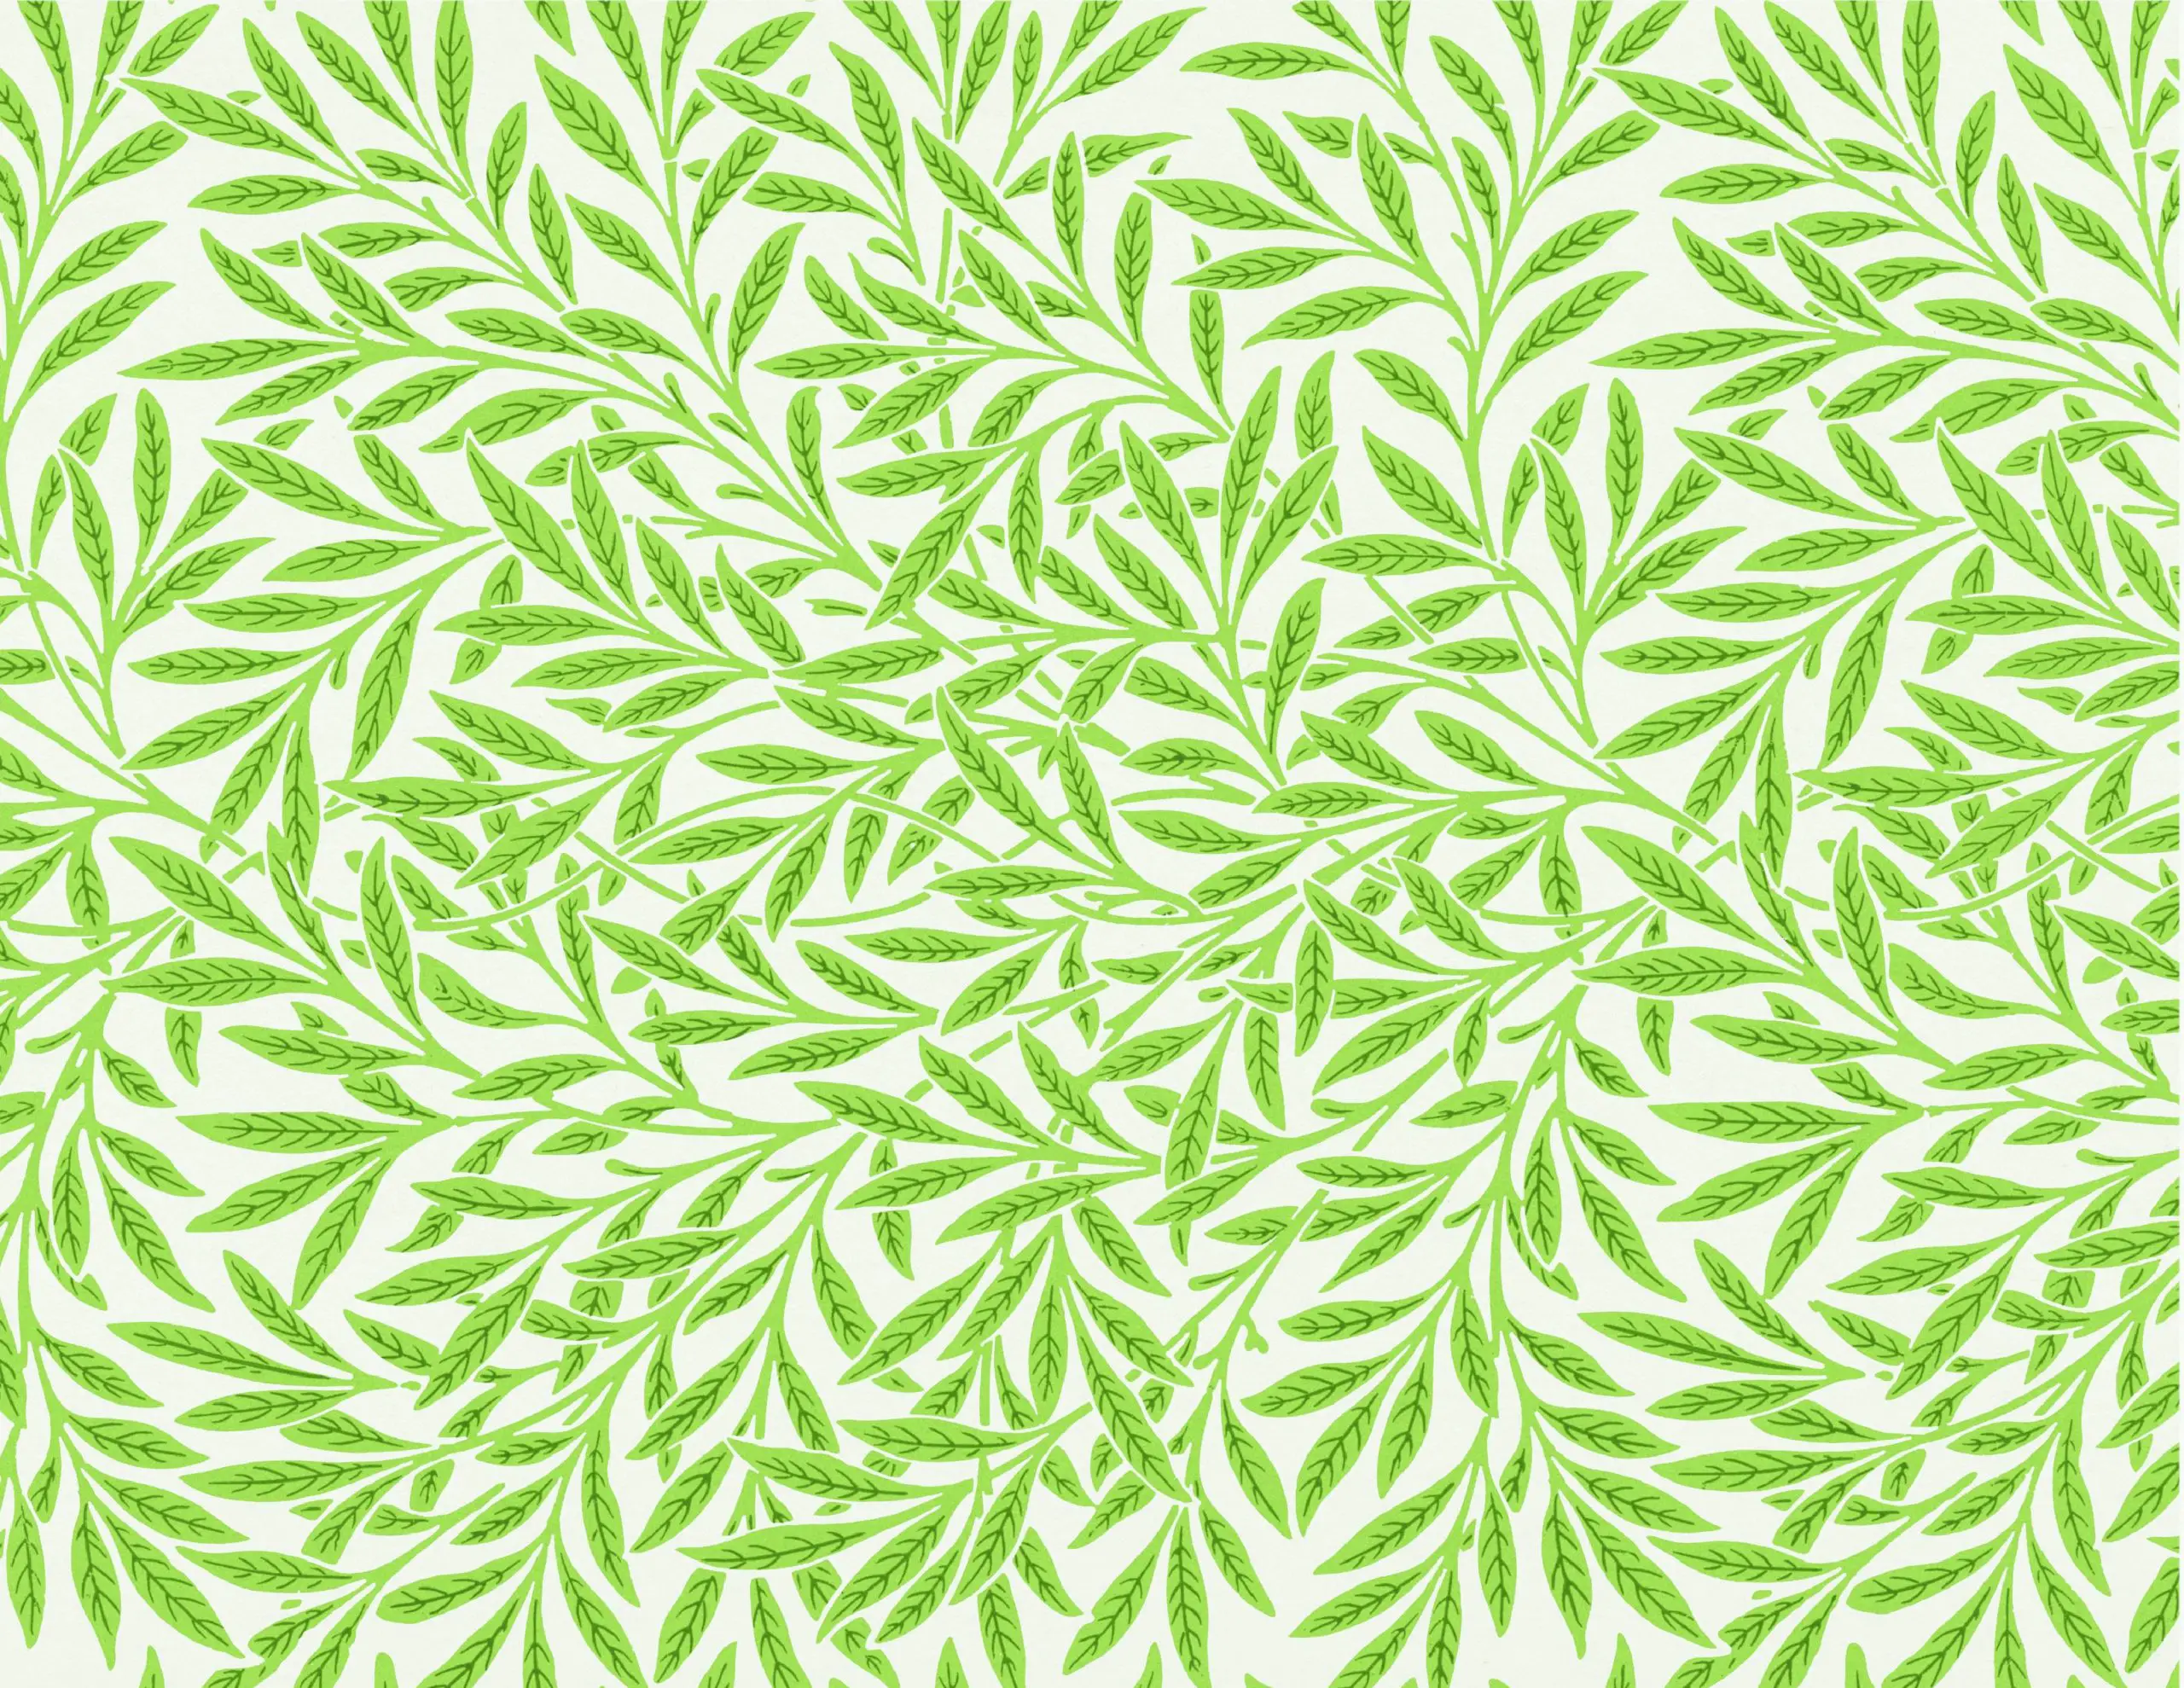 Willow Green Leaf Pattern 1850s Grand Vintage Vines Miniature Dollhouse Wallpaper Printable